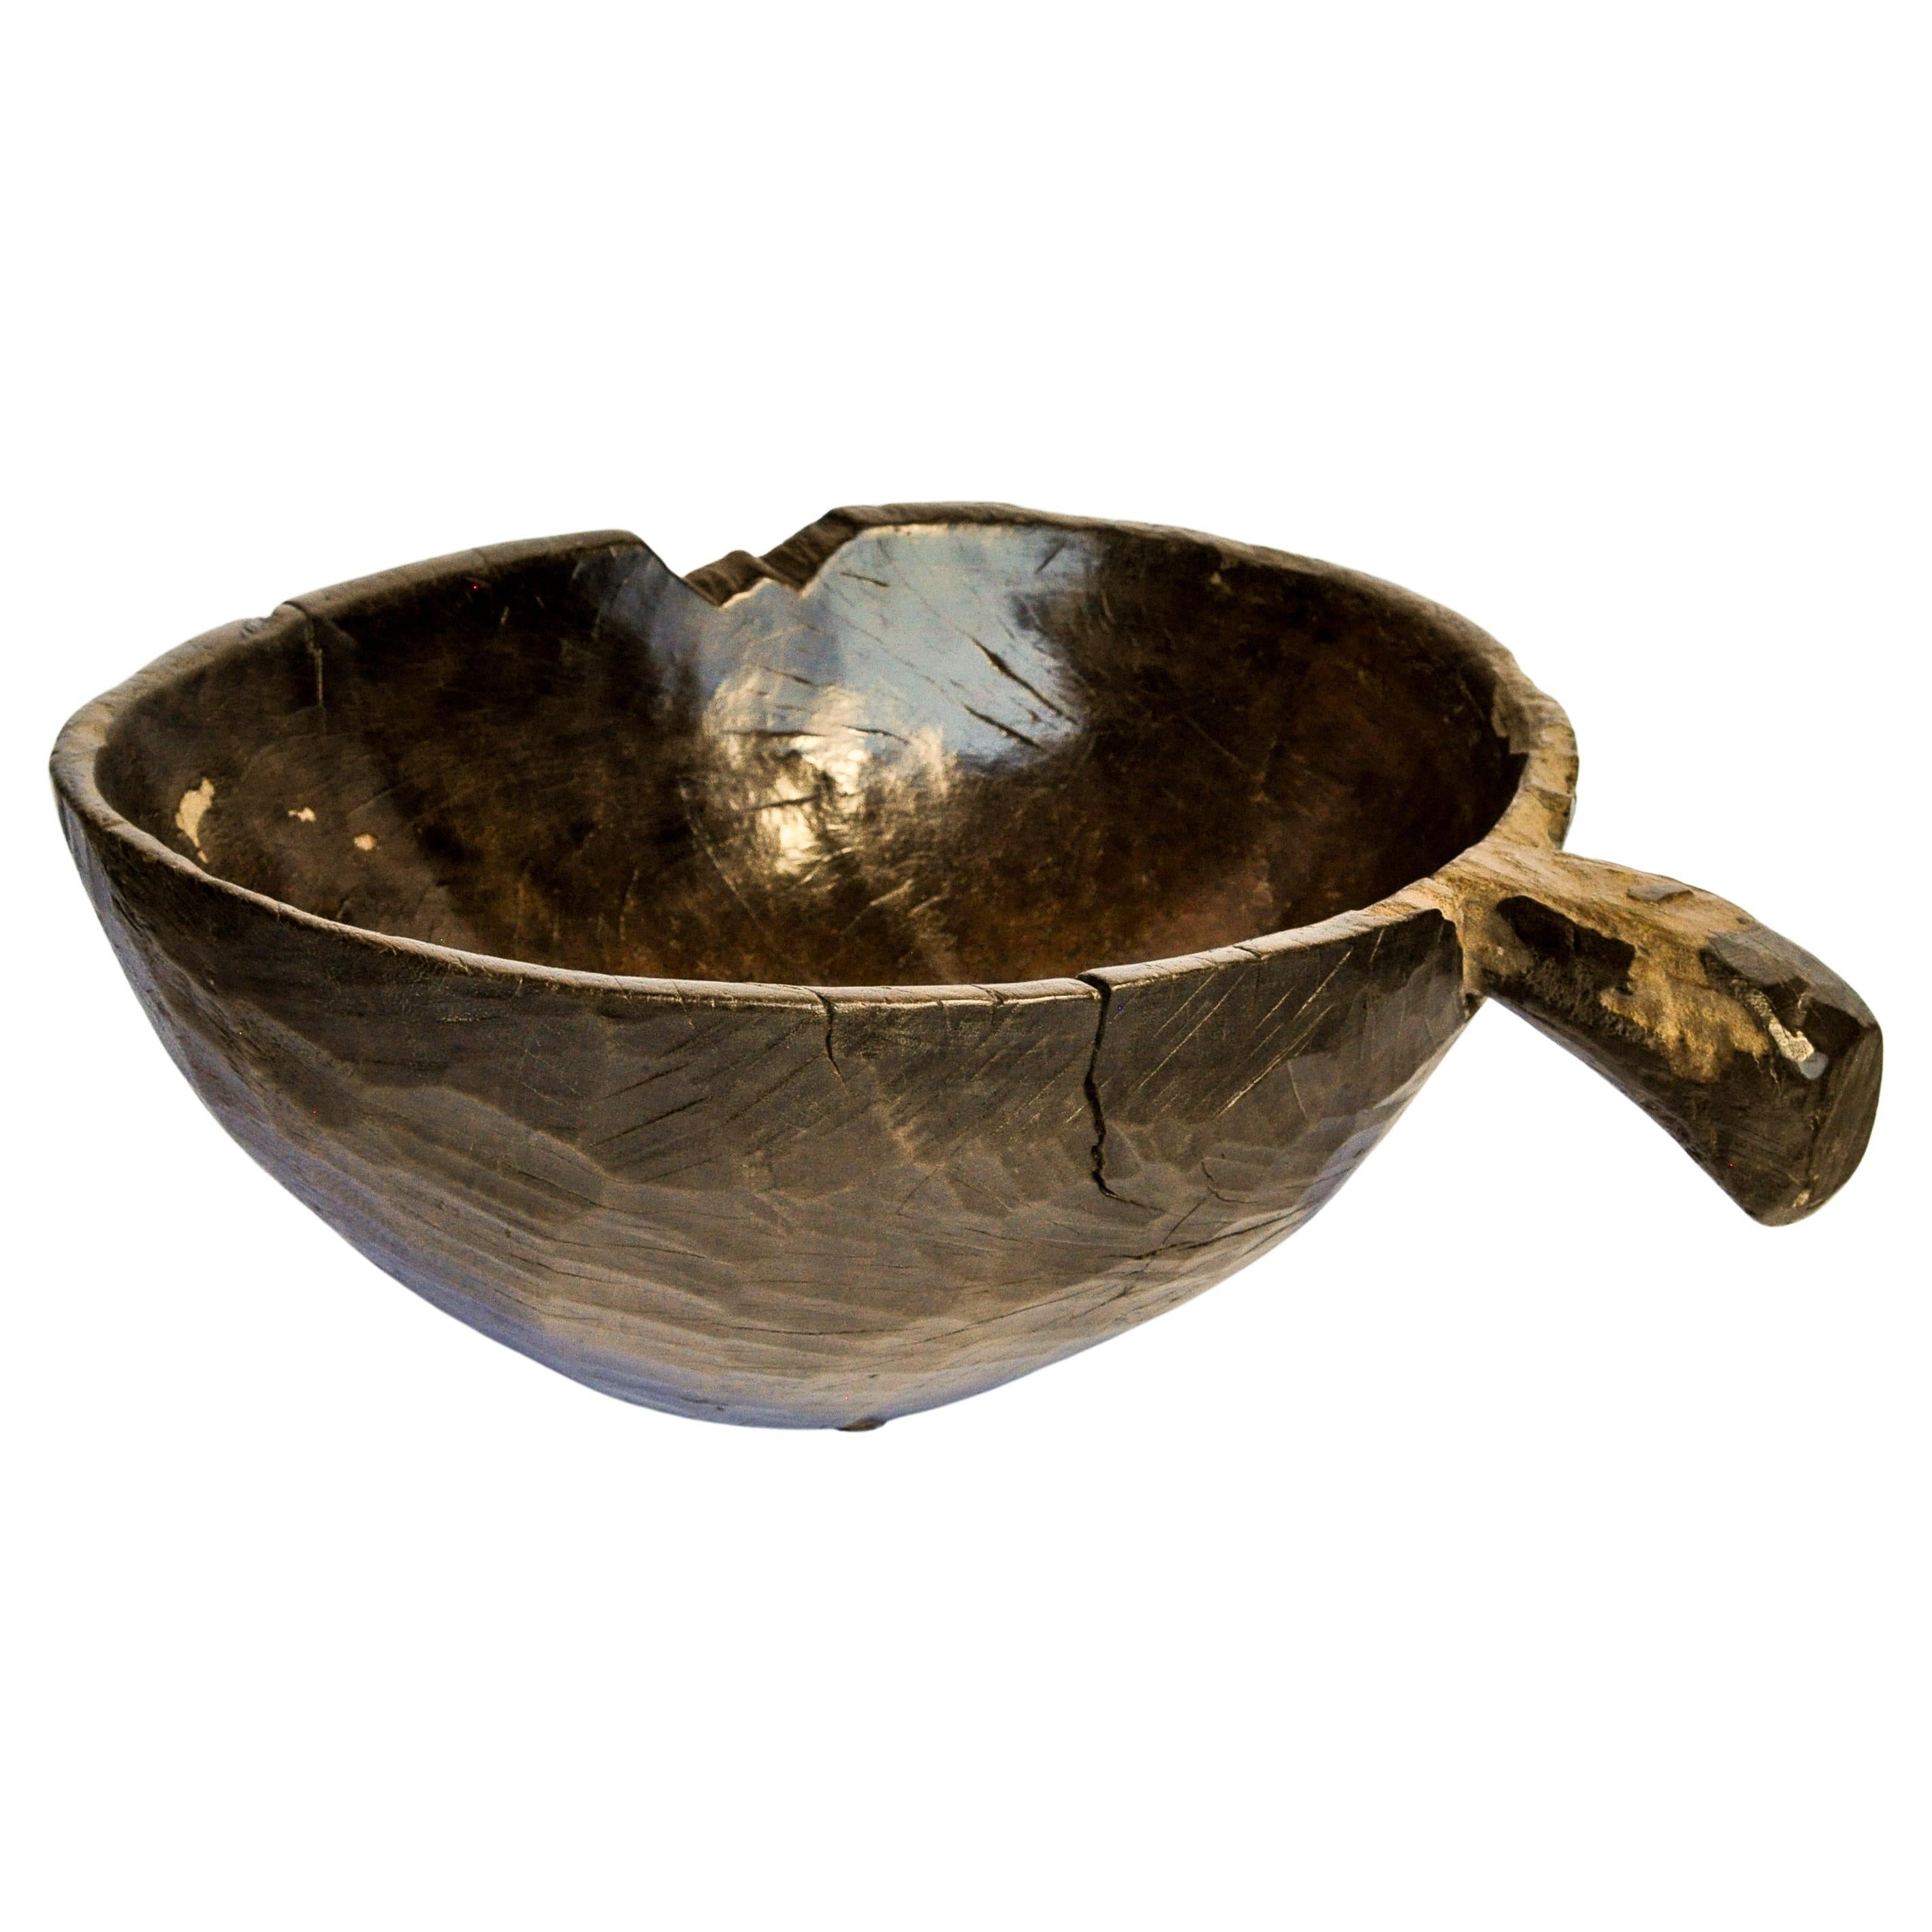 Old Hand Hewn Wooden Bowl with Handle from Sulawesi, Indonesia, Mid-20th Century